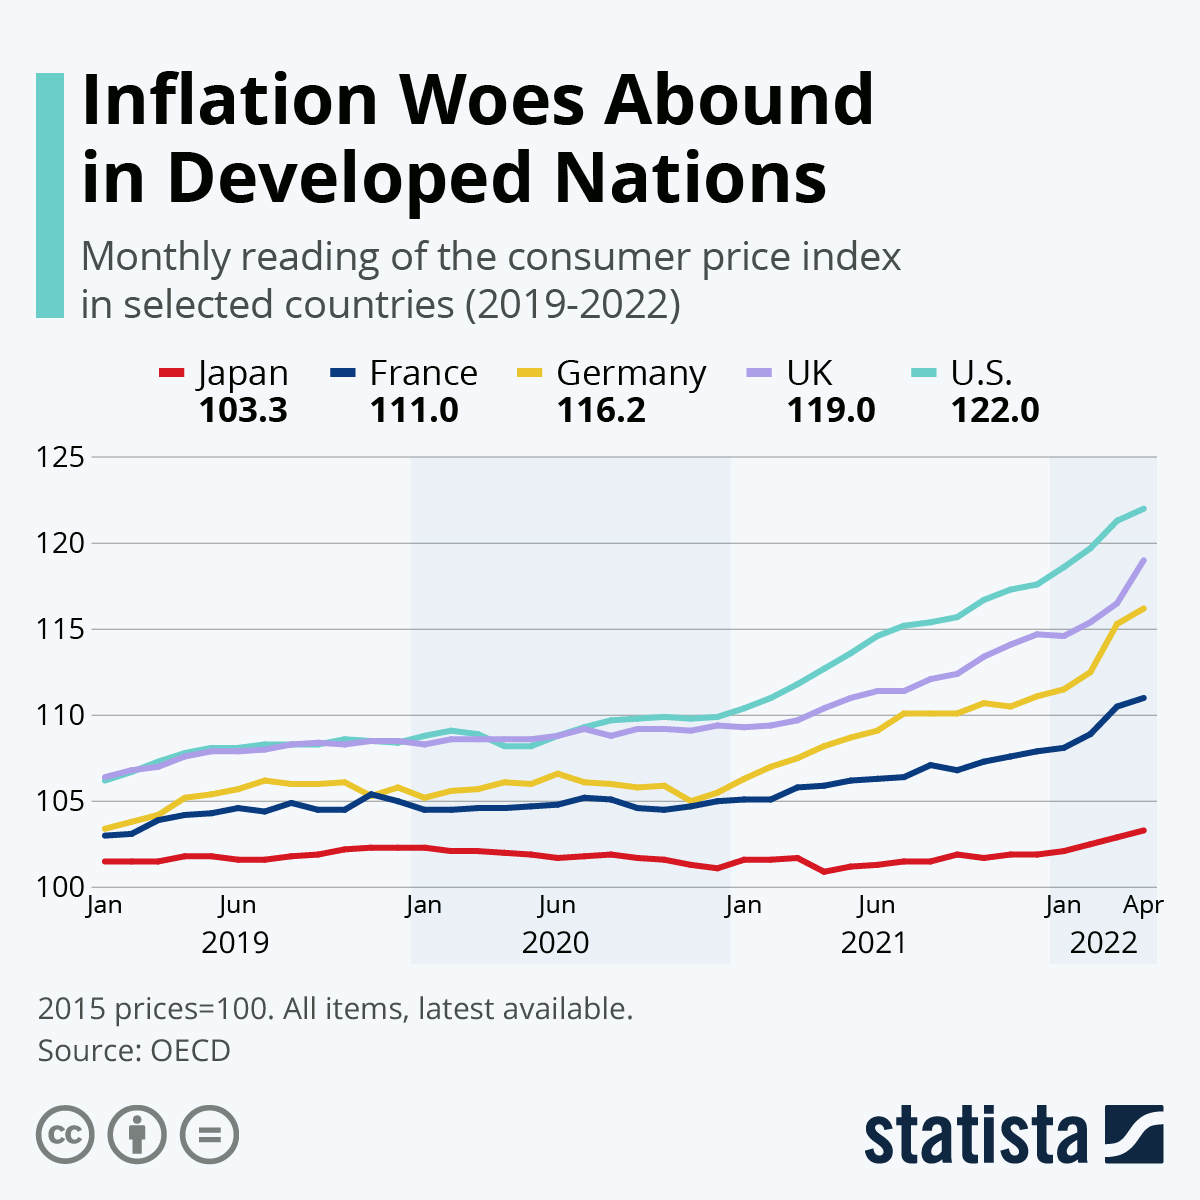 Inflation Woes Abound in Developed Nations